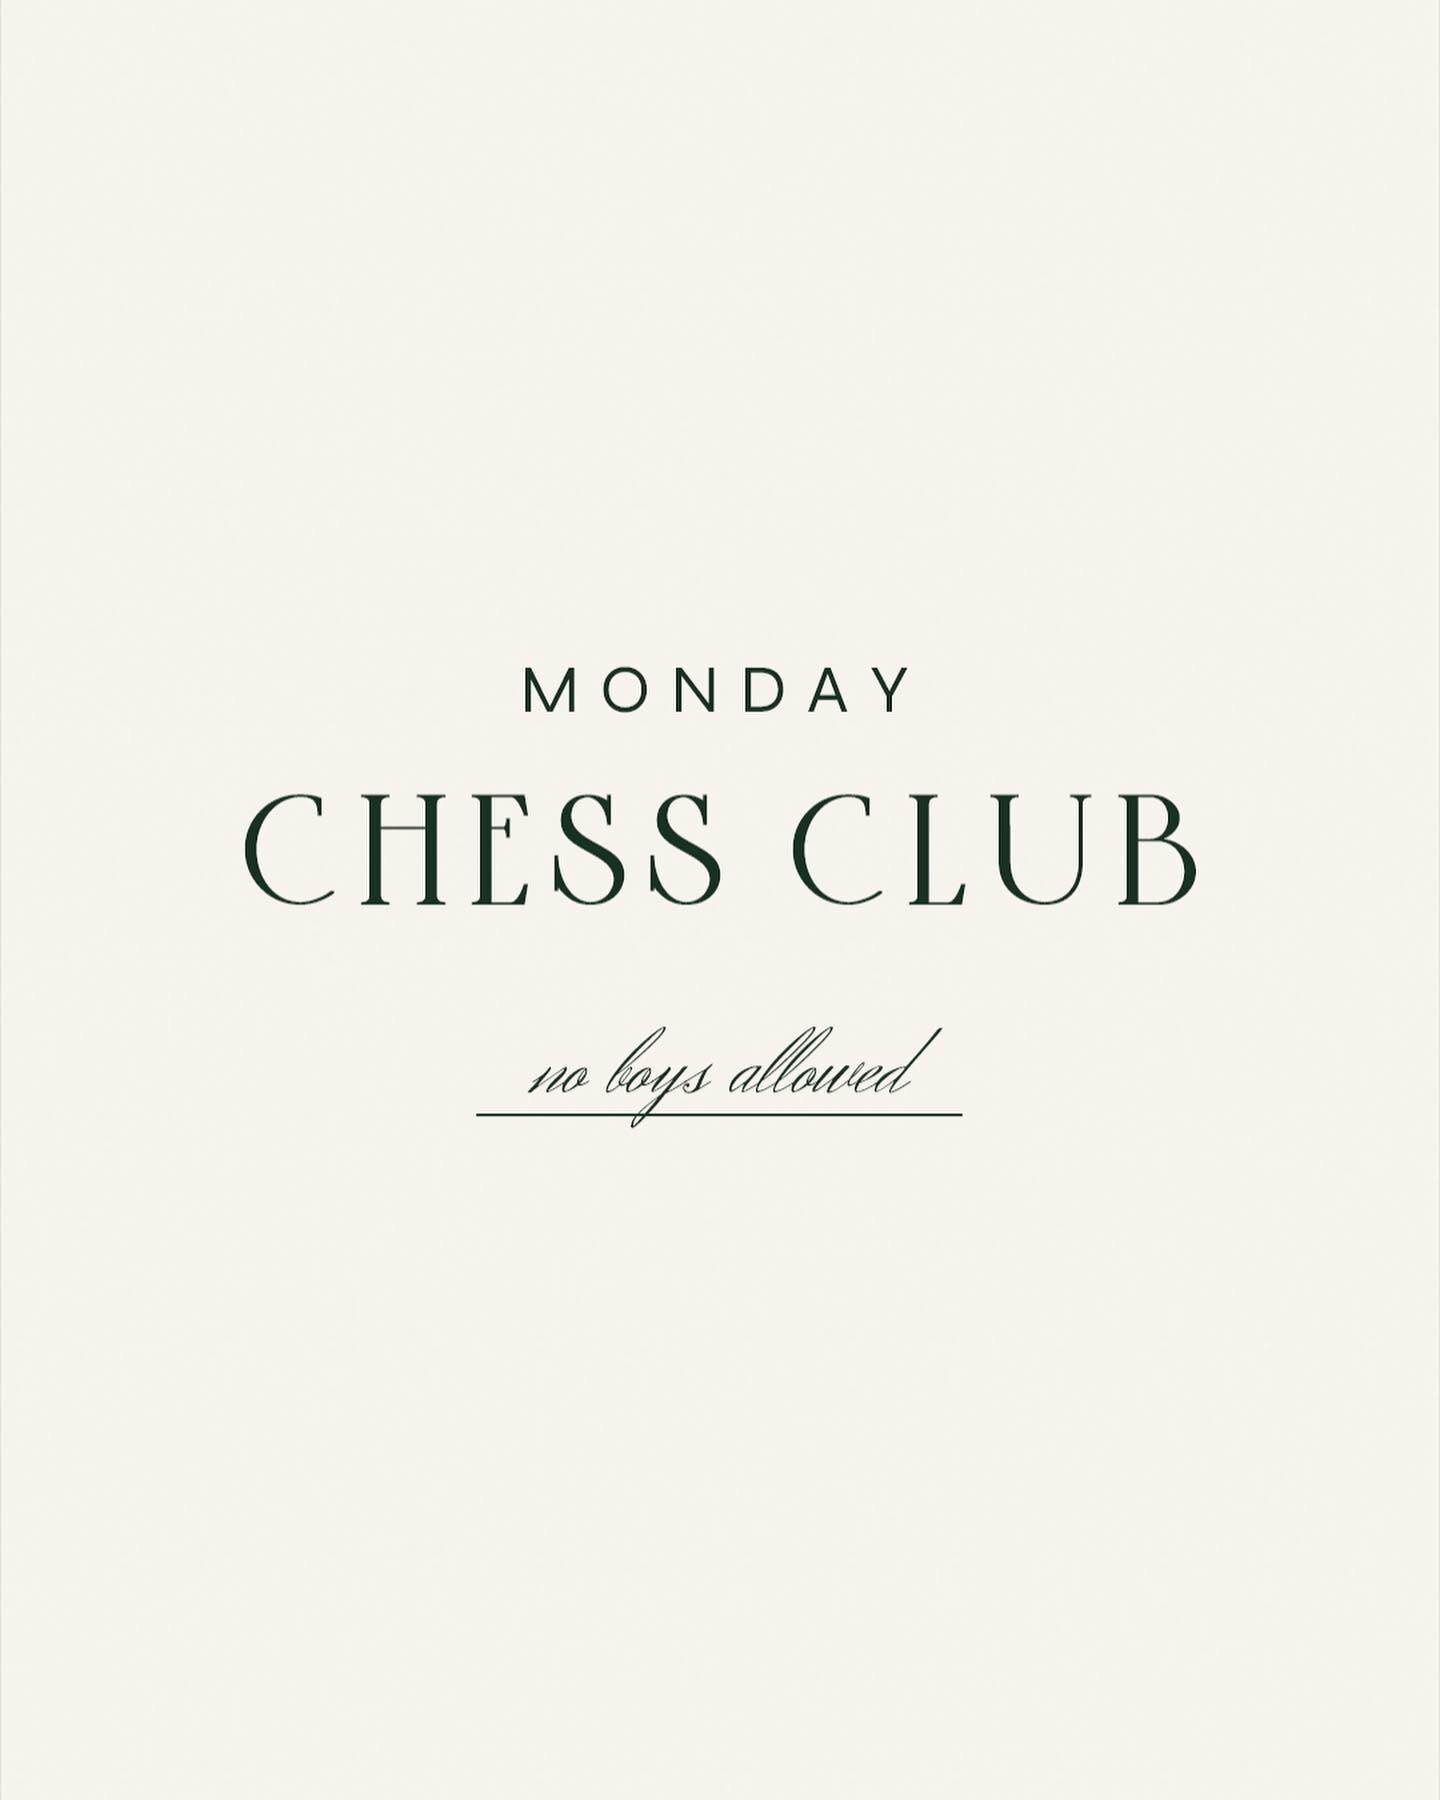 ✺ Monday Chess Club ✺

Here&rsquo;s peek at a fun passion project I&rsquo;ve been working on lately: Monday Chess Club.

Effortless and chic, Monday Chess Club is a woman&rsquo;s clothing brand for conscious consumers.

What do you love to work on in